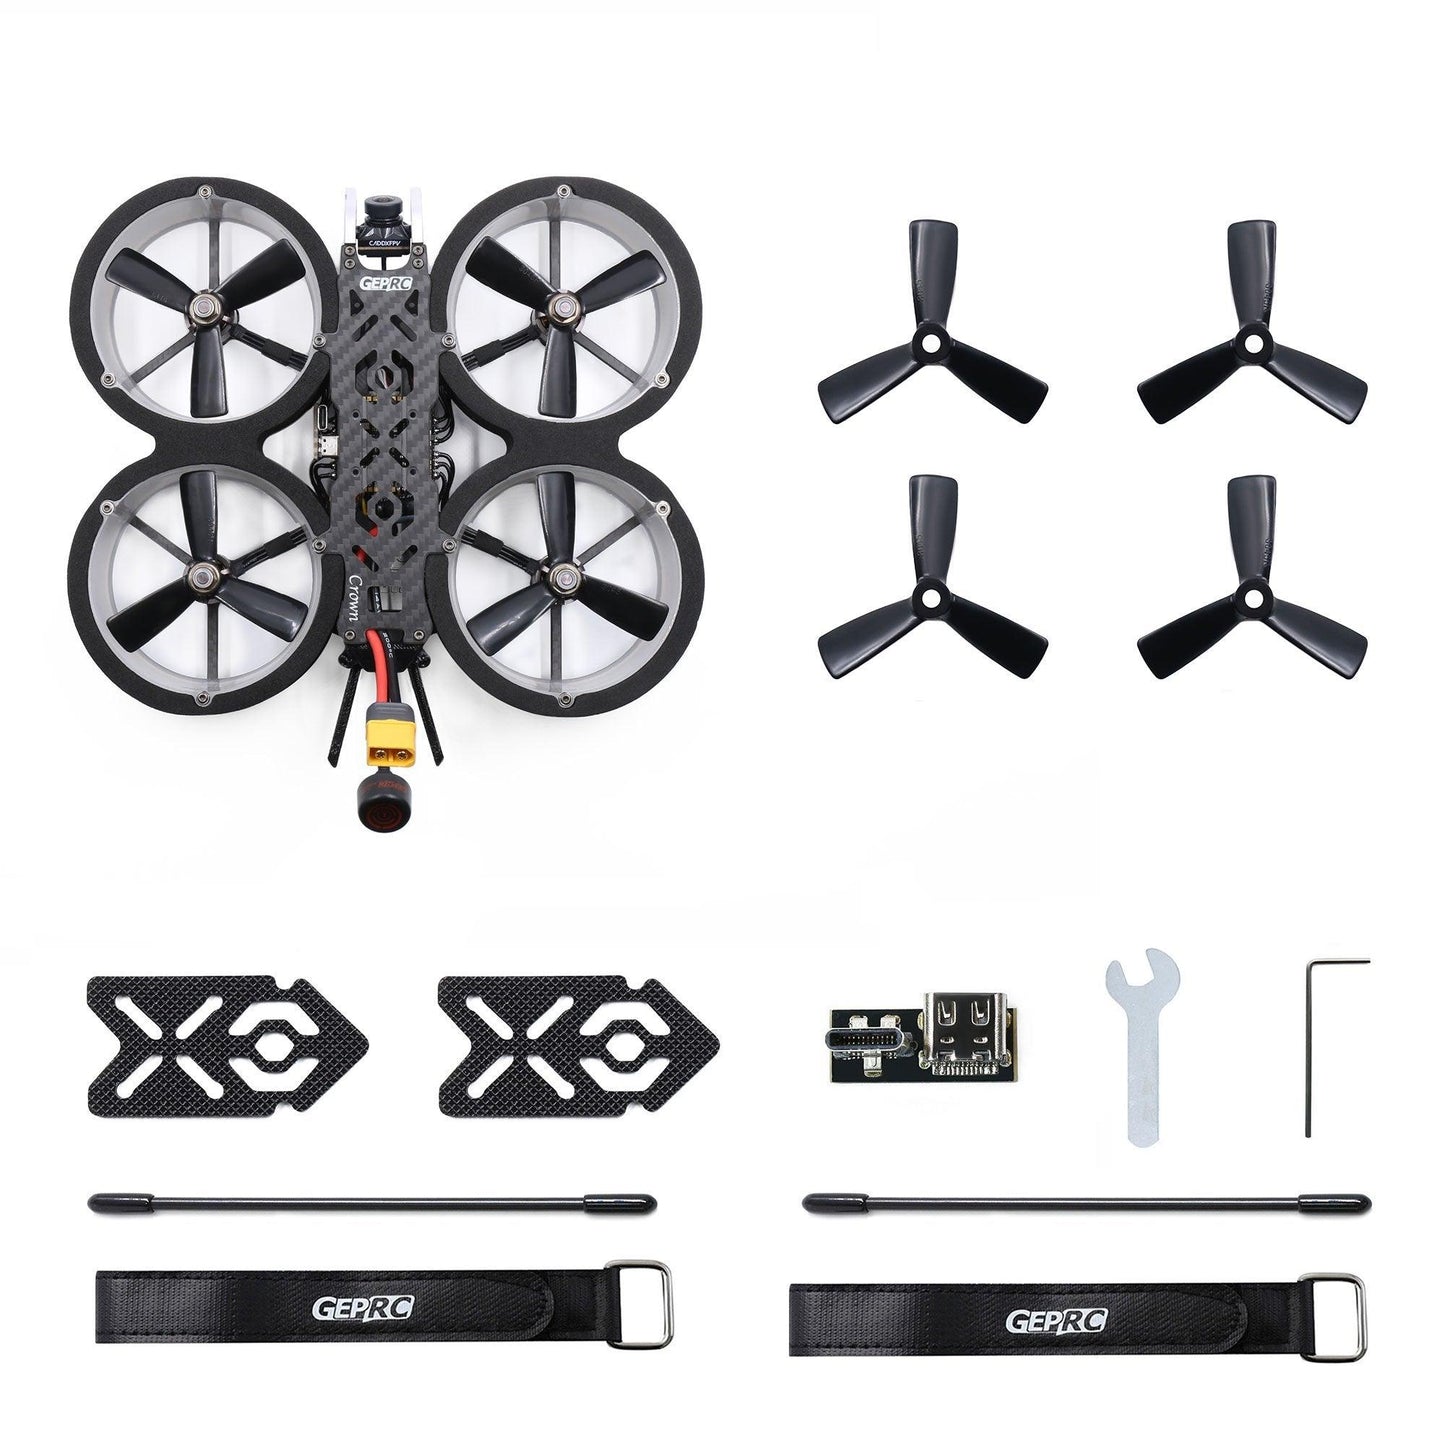 GEPRC Crown HD Cinewhoop FPV Drone - 3inch FPV Carbon Fiber Frame 1408 3500KV (4S) /1408 2500KV (6S) For RC FPV Quadcopter Freestyle Drone - RCDrone